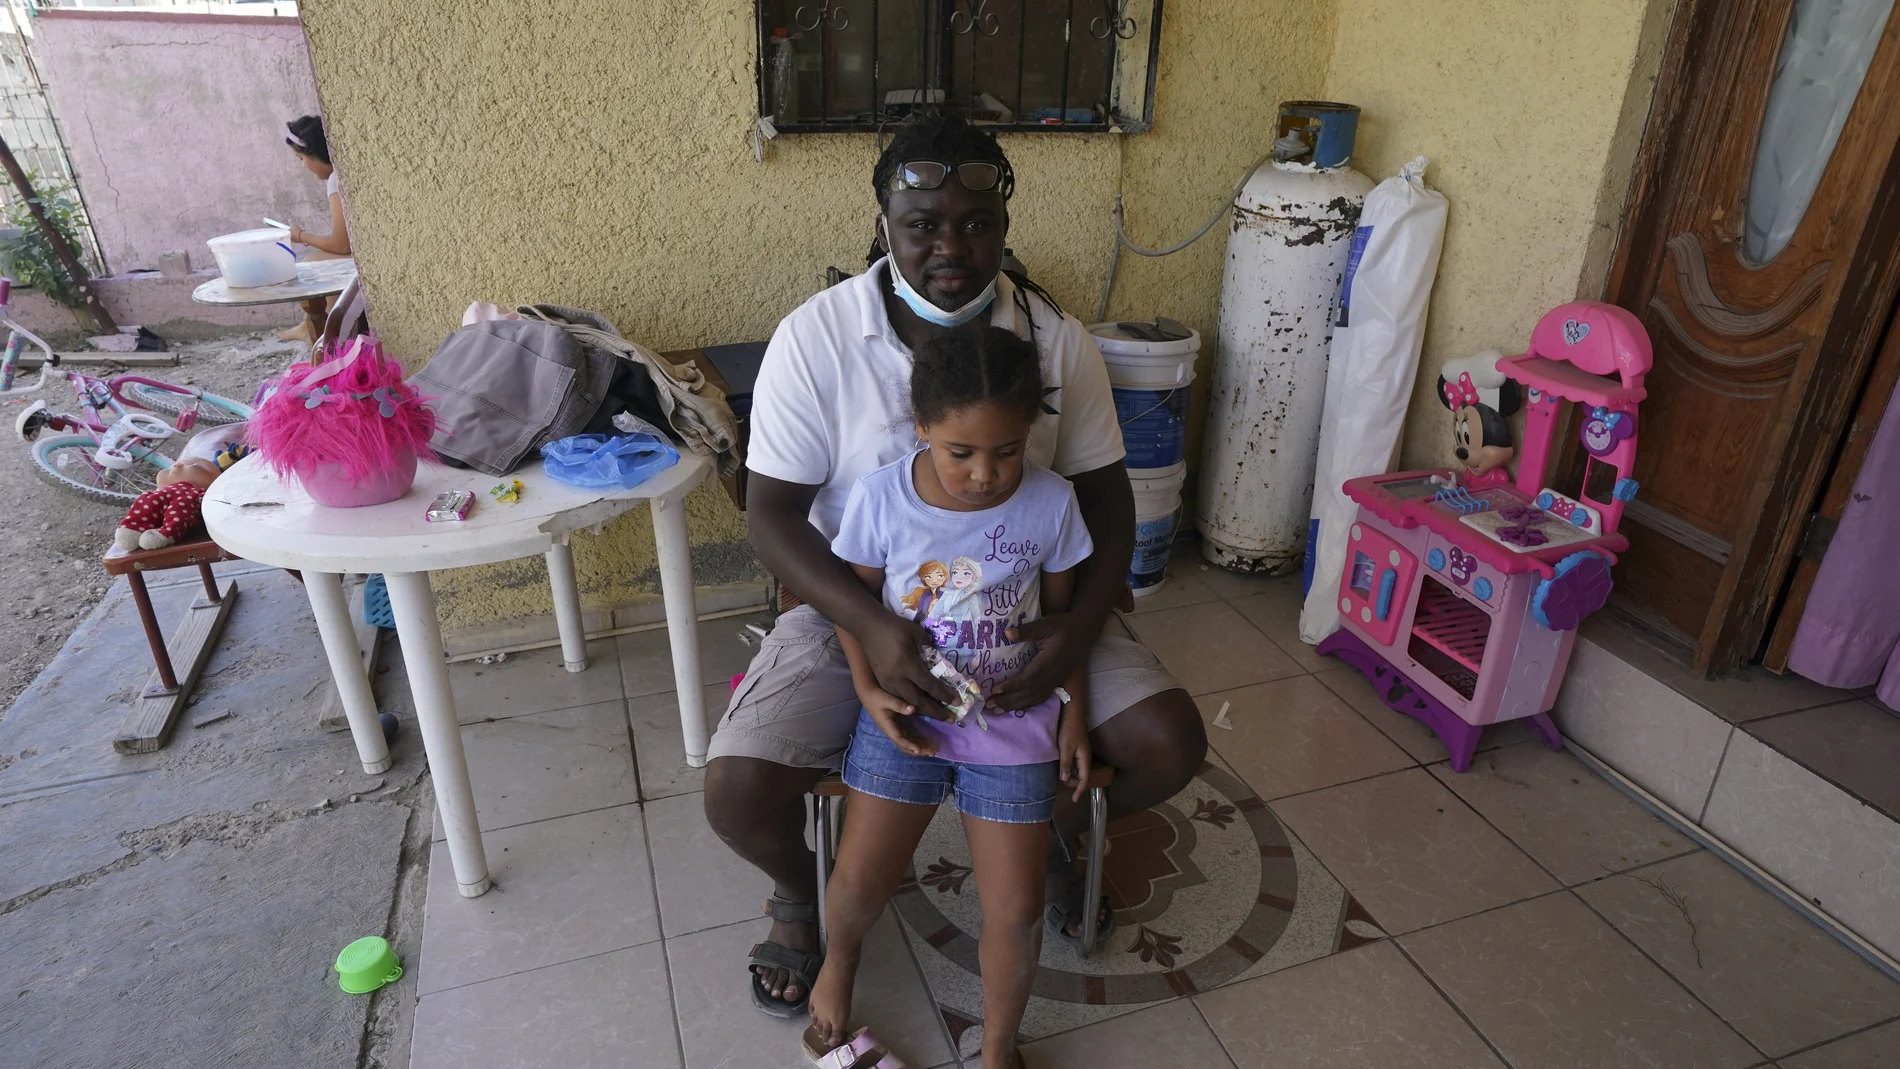 Mensah Montant and his daughter Rachel sit on their porch in Ciudad Acuna, Friday, Sept. 24, 2021. Montant, from the African nation of Togo, and his wife, are among the Acuna residents who are responding to the needs of Haitian migrants. (AP Photo/Fernando Llano)